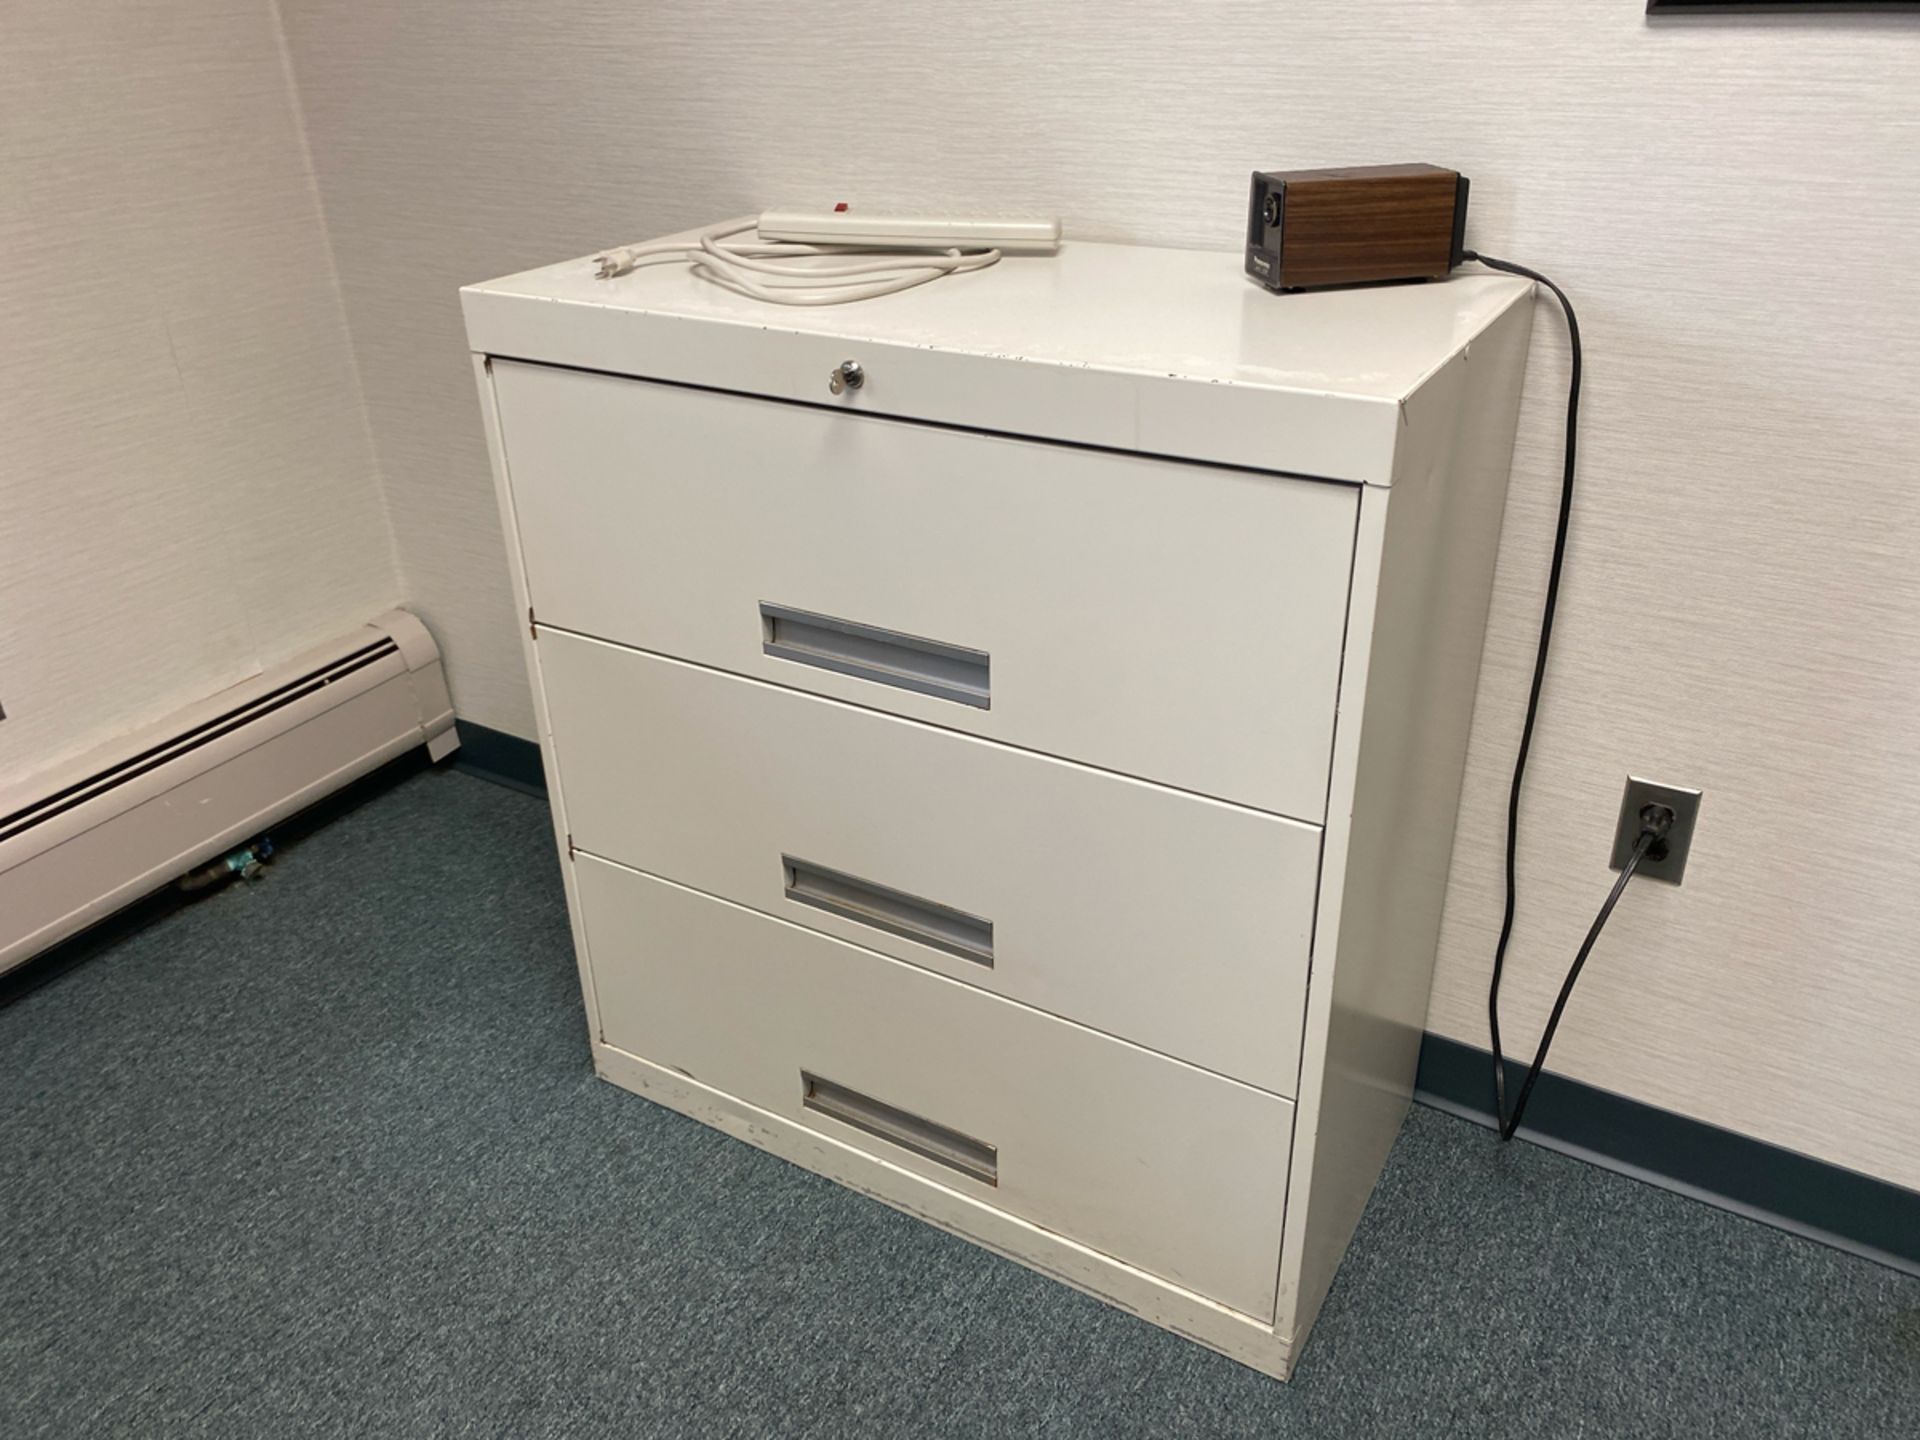 A Group of Office Furniture Throughout Rooms - Image 6 of 10